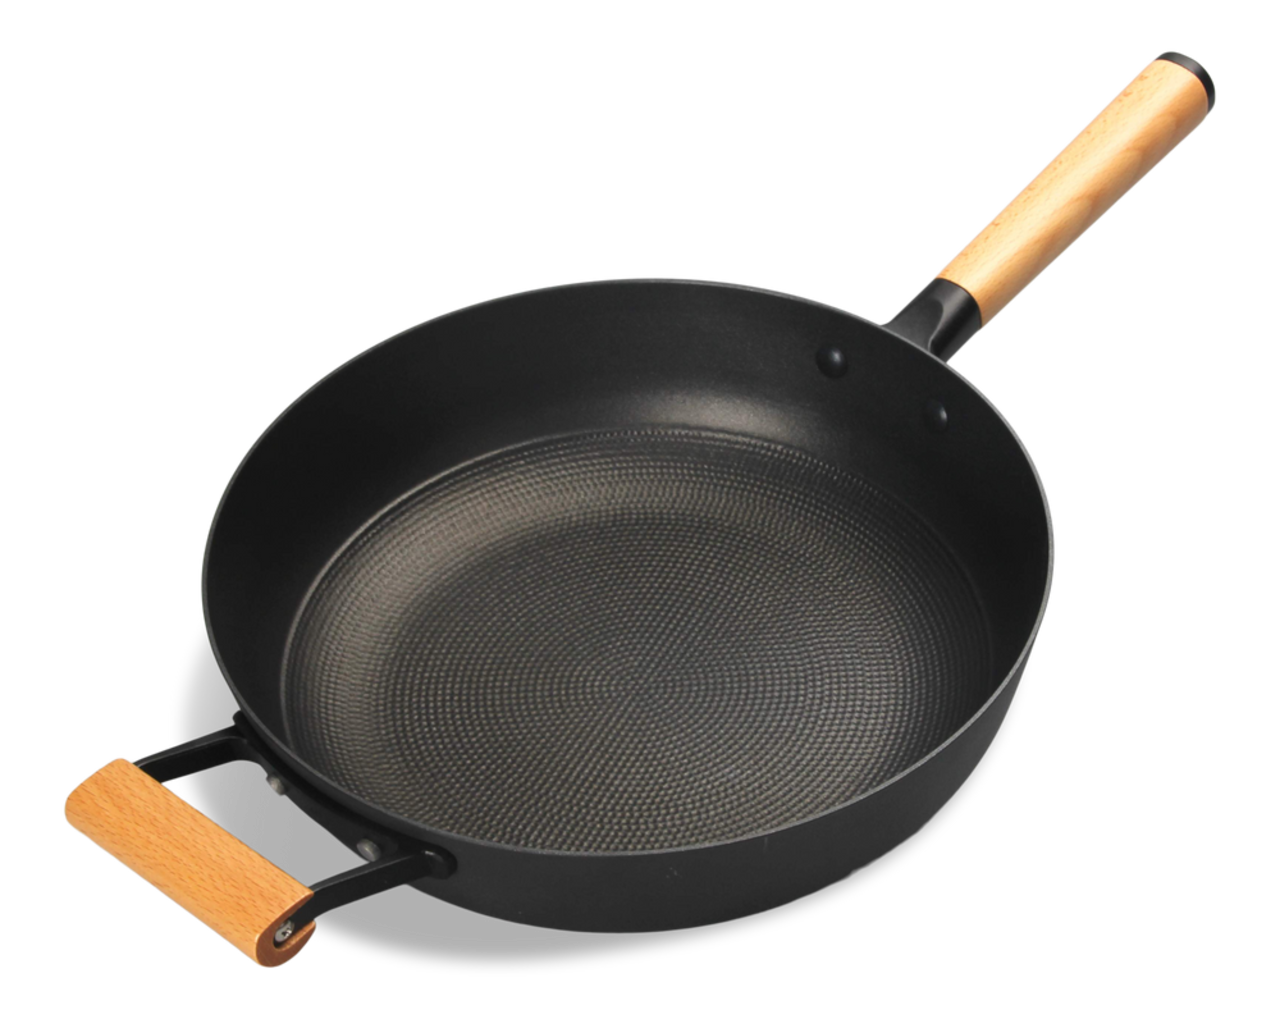 https://media-www.canadiantire.ca/product/living/kitchen/cookware/1426469/paderno-30cm-cast-iron-non-stick-jumbo-cooker-3b8b2616-9b19-431c-bace-87c9d153e94f.png?imdensity=1&imwidth=1244&impolicy=mZoom